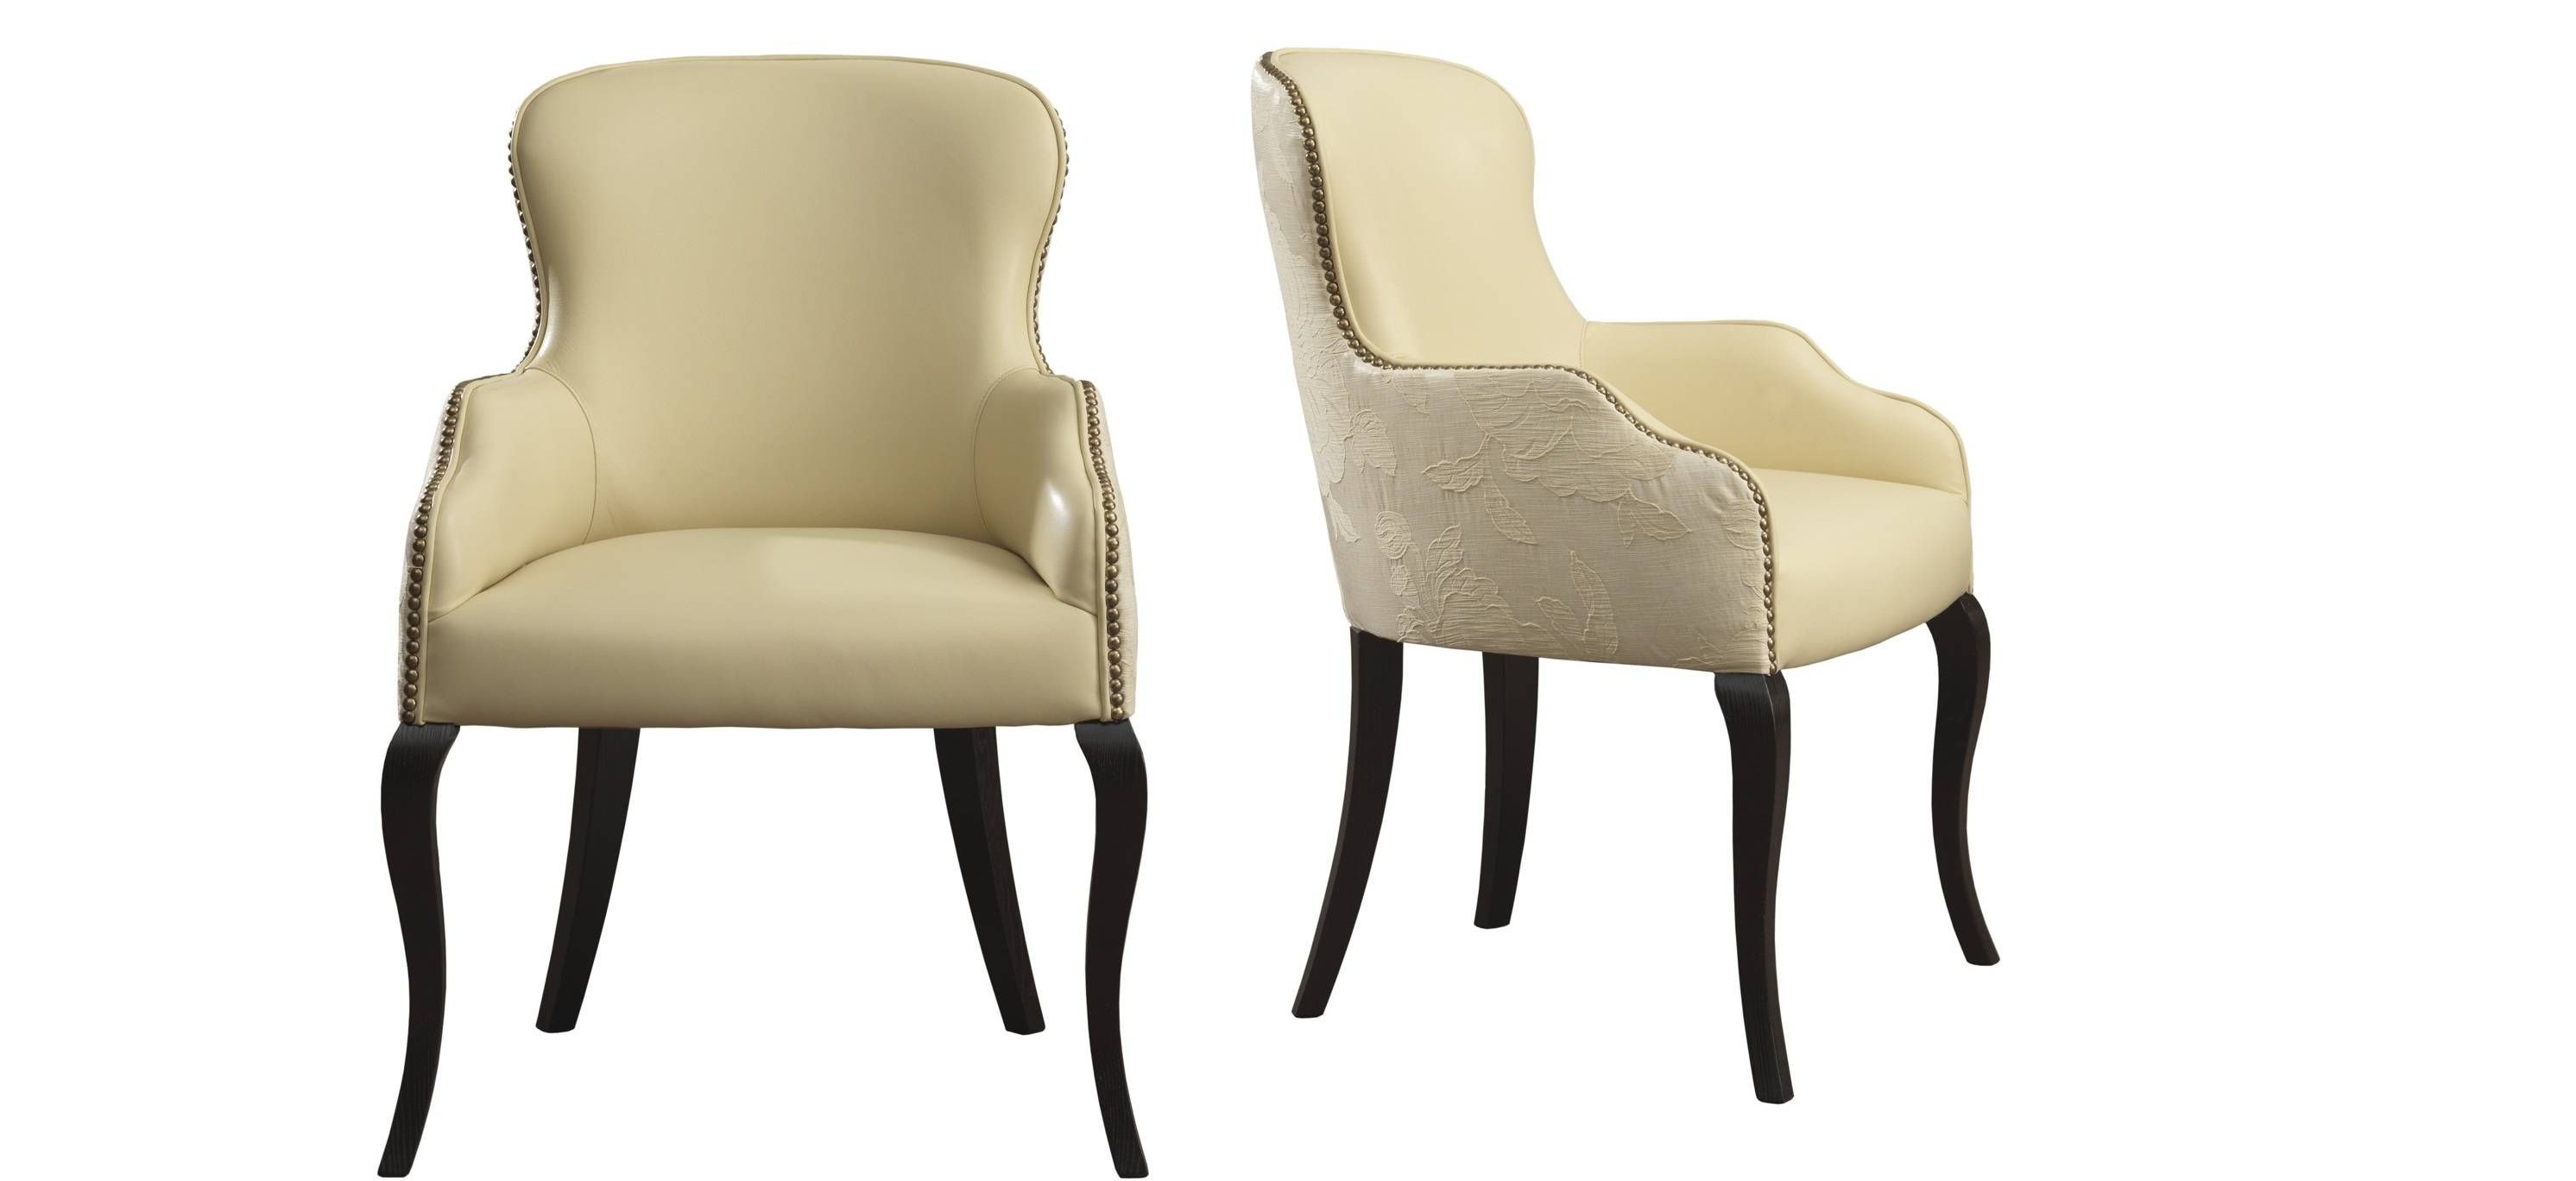 Small Arm Chairs | Modern Chairs Design With Small Arm Chairs (View 7 of 30)